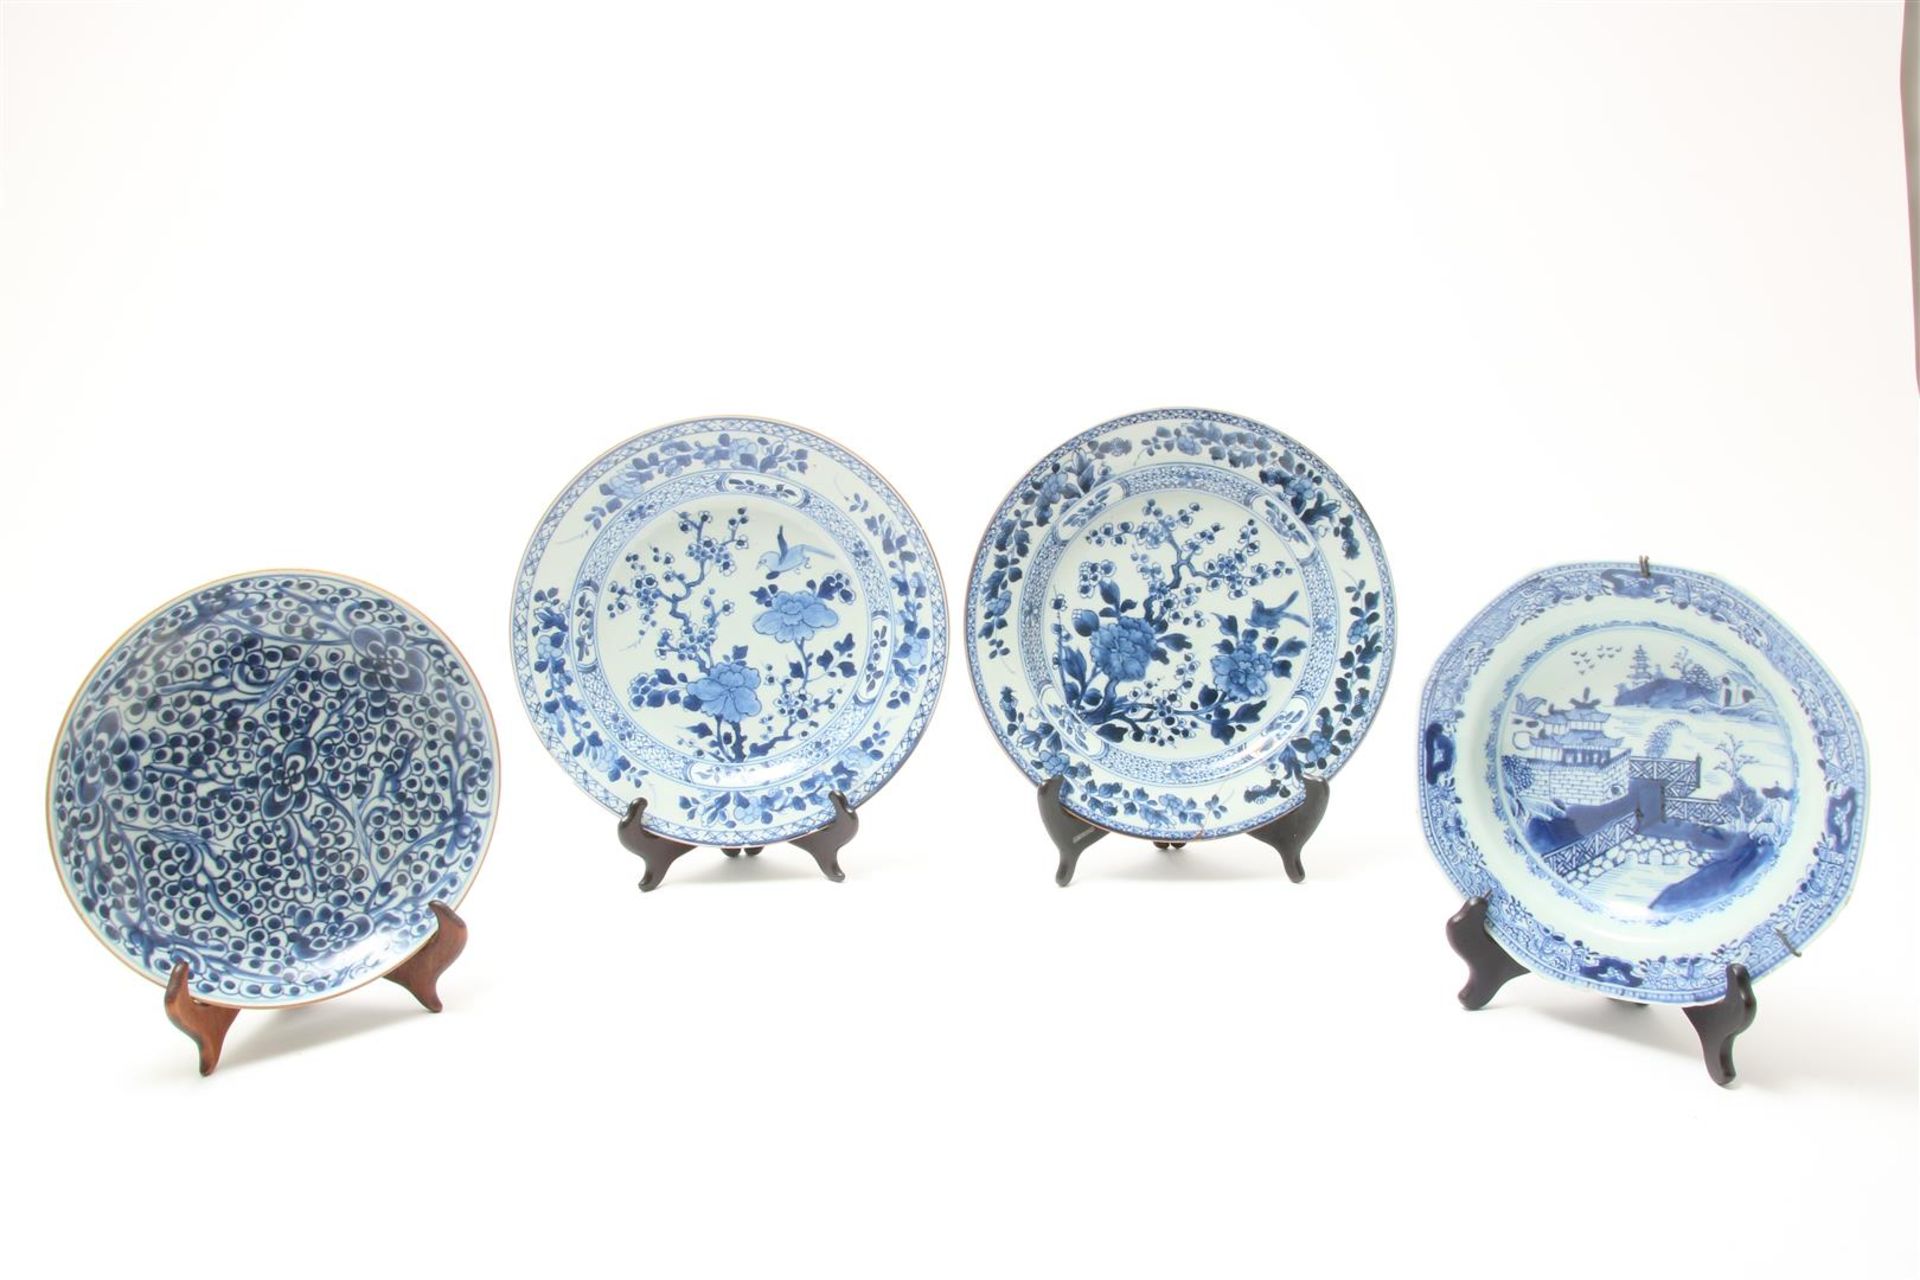 Set of porcelain Qianlong plates with a bird near flowering shrubs and a blossom branch,